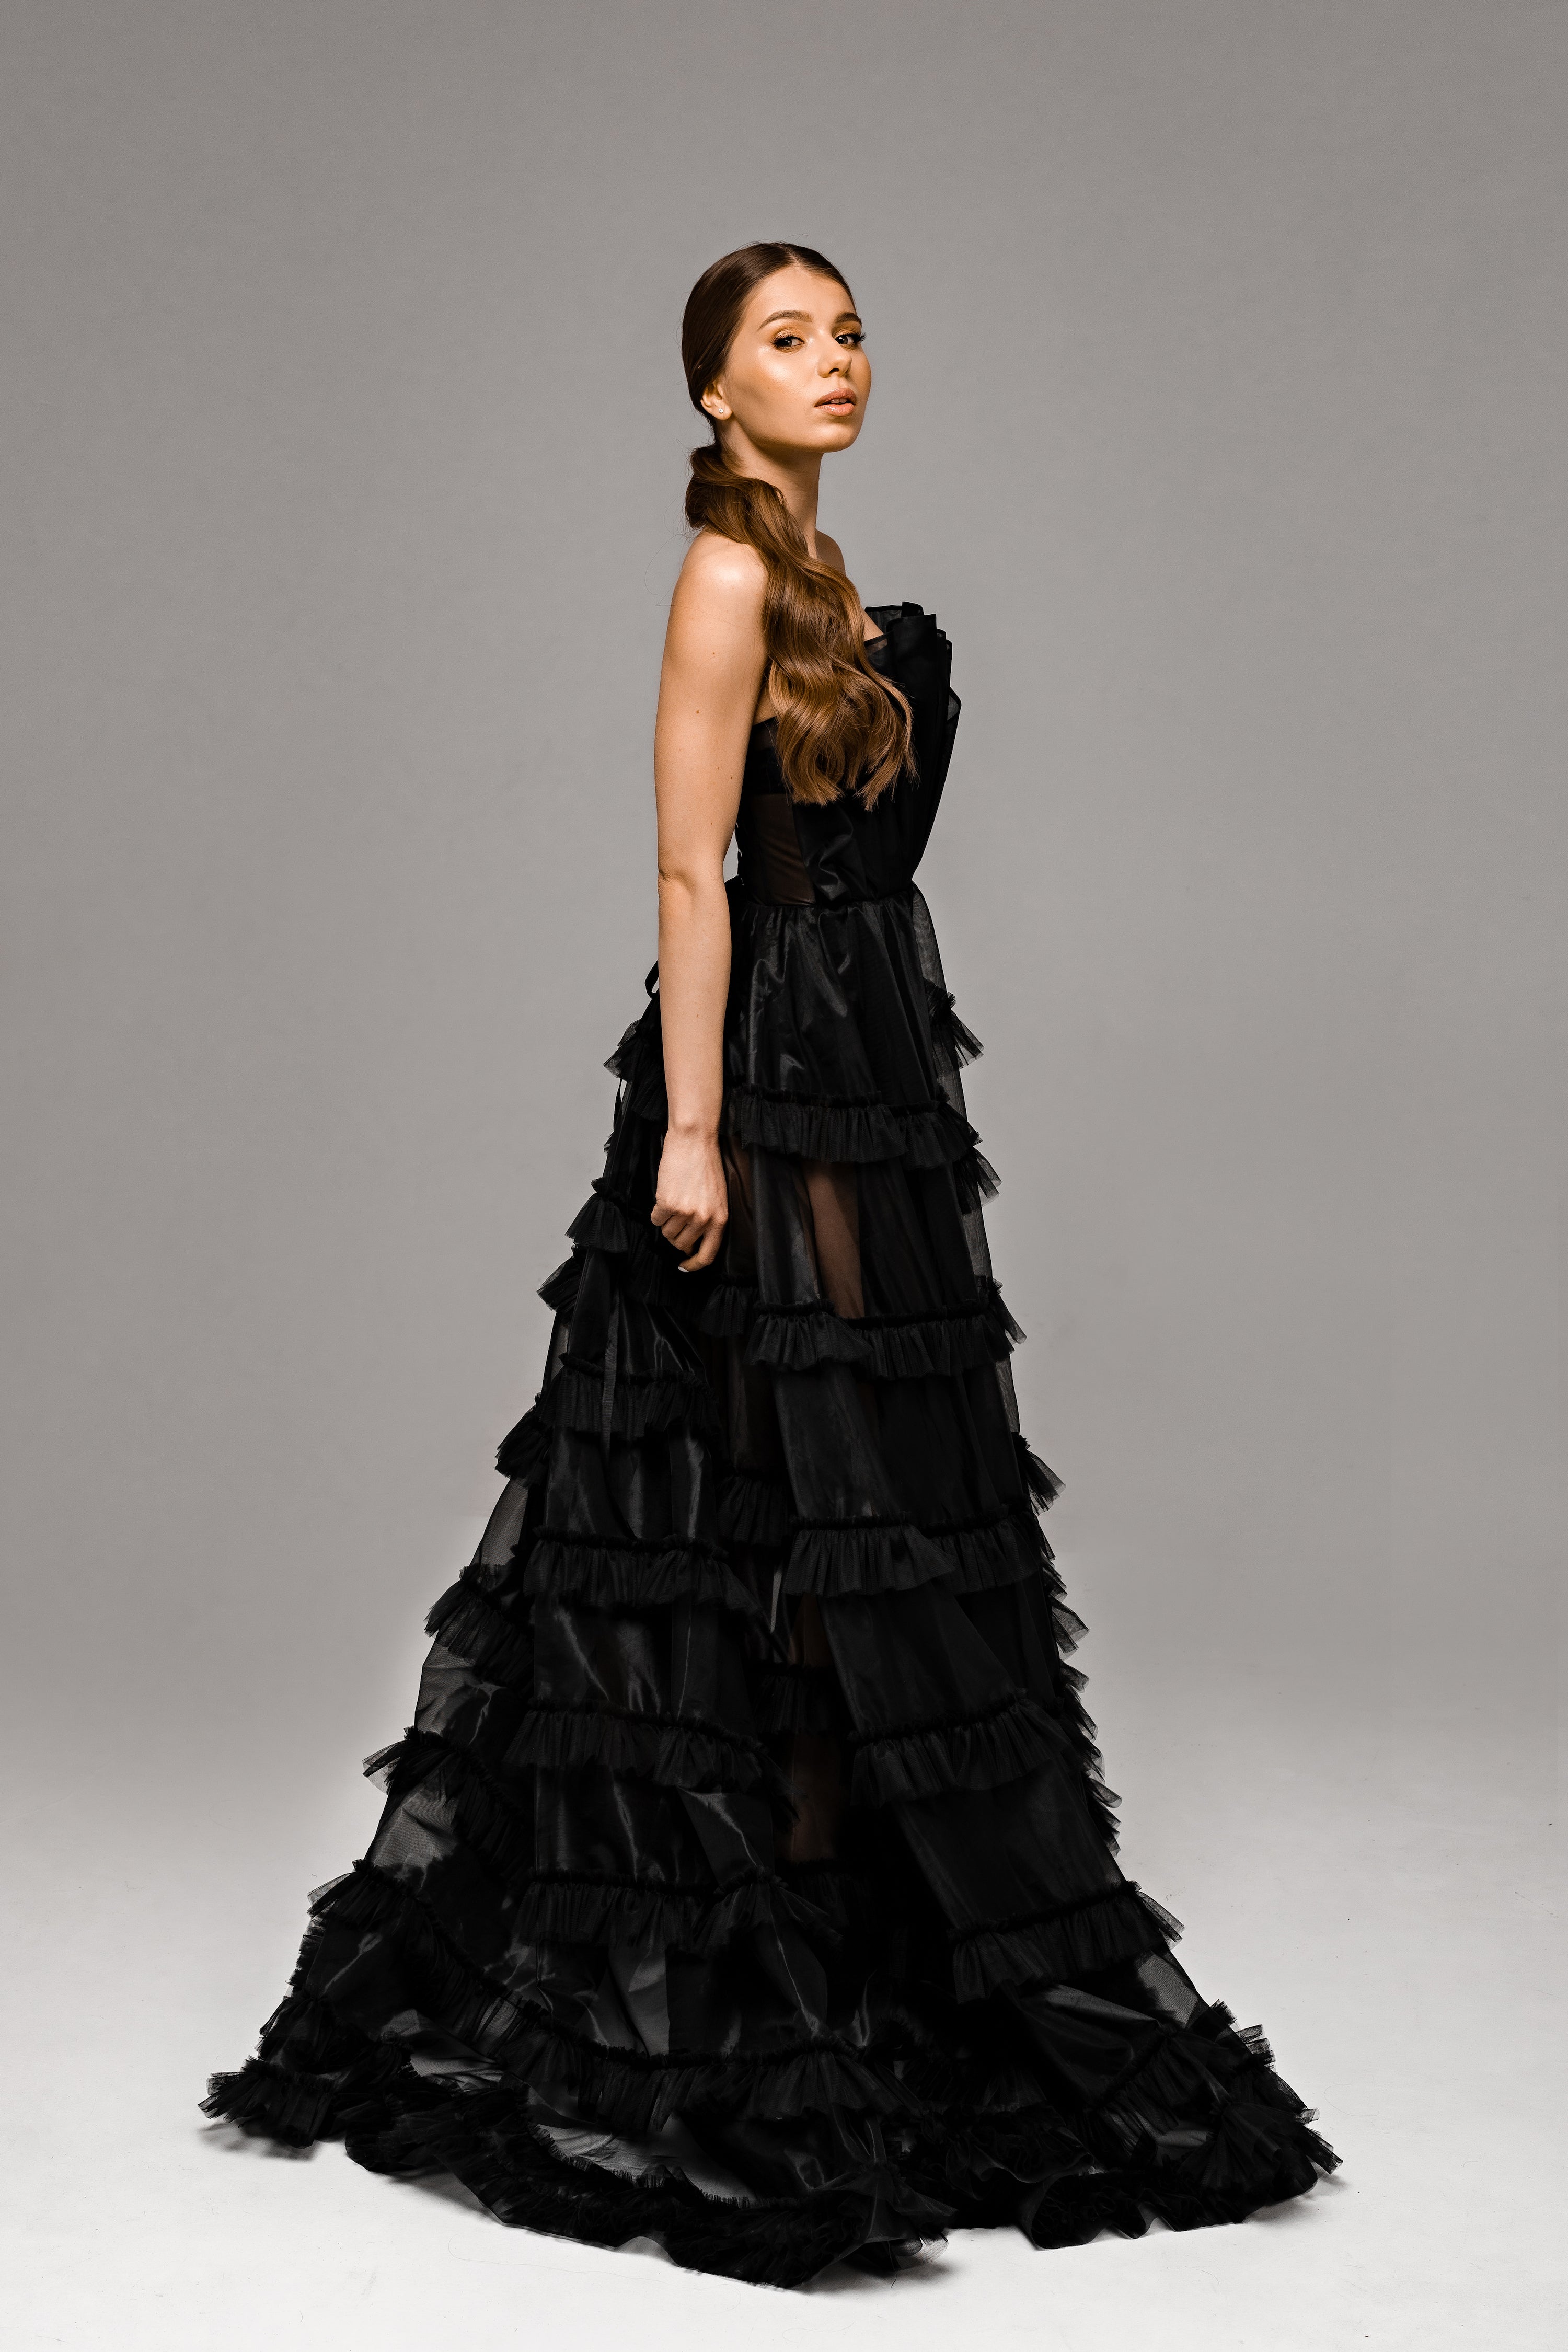 "Onyx" Black Floral Corset Wedding Dress with Embroidered Ruffled Train